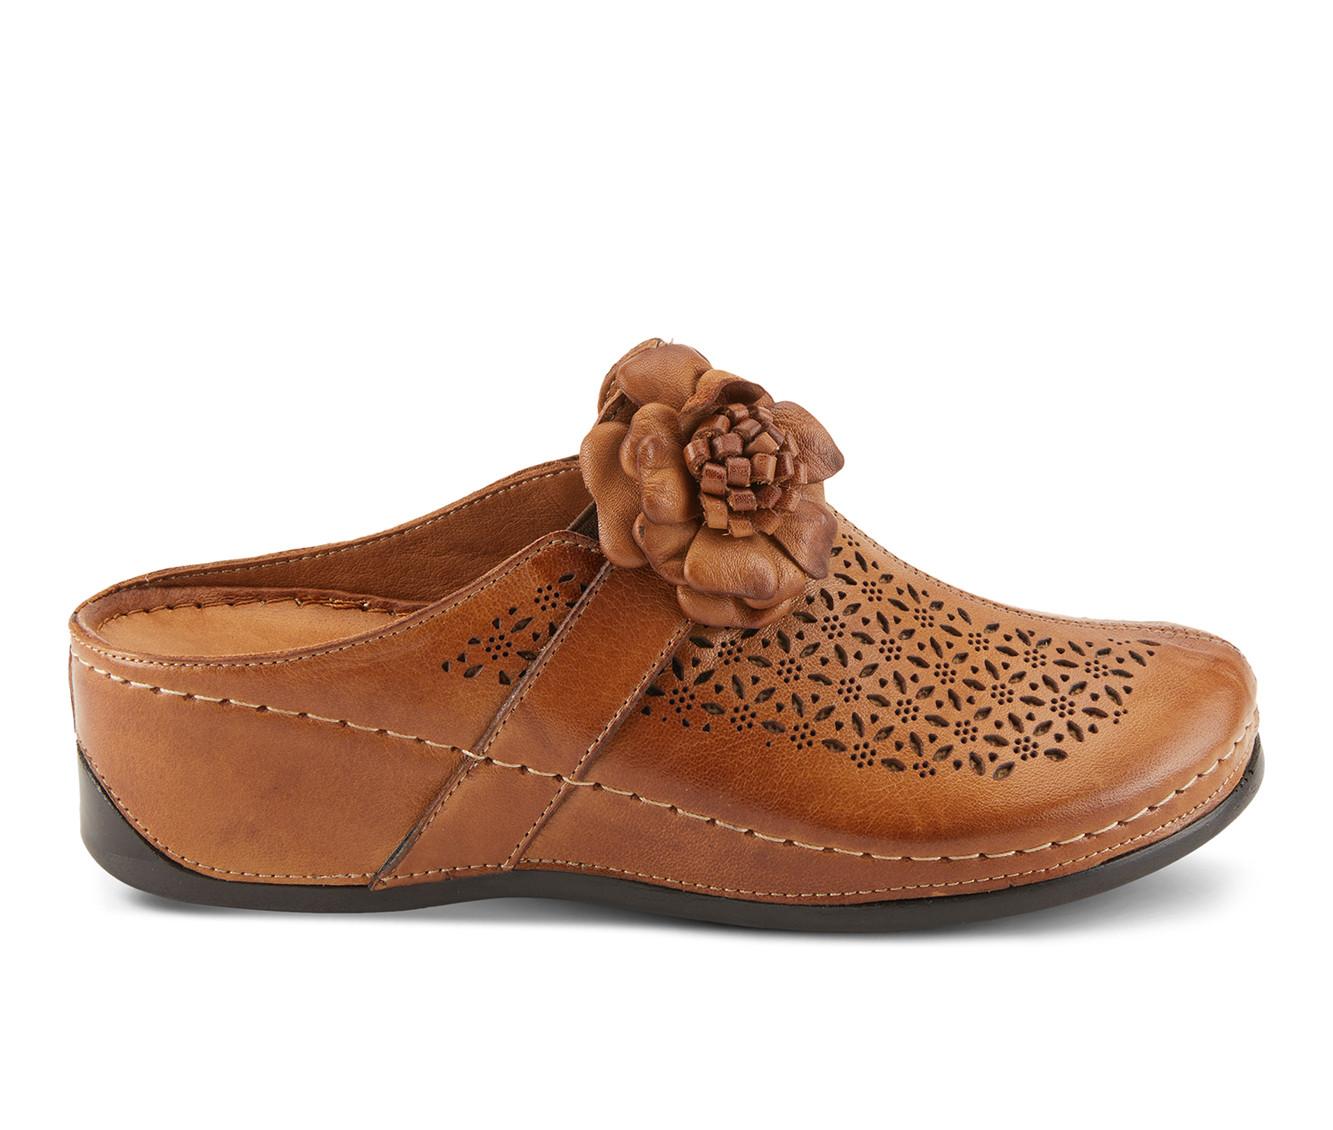 Women's SPRING STEP Lilybean Wedge Clogs